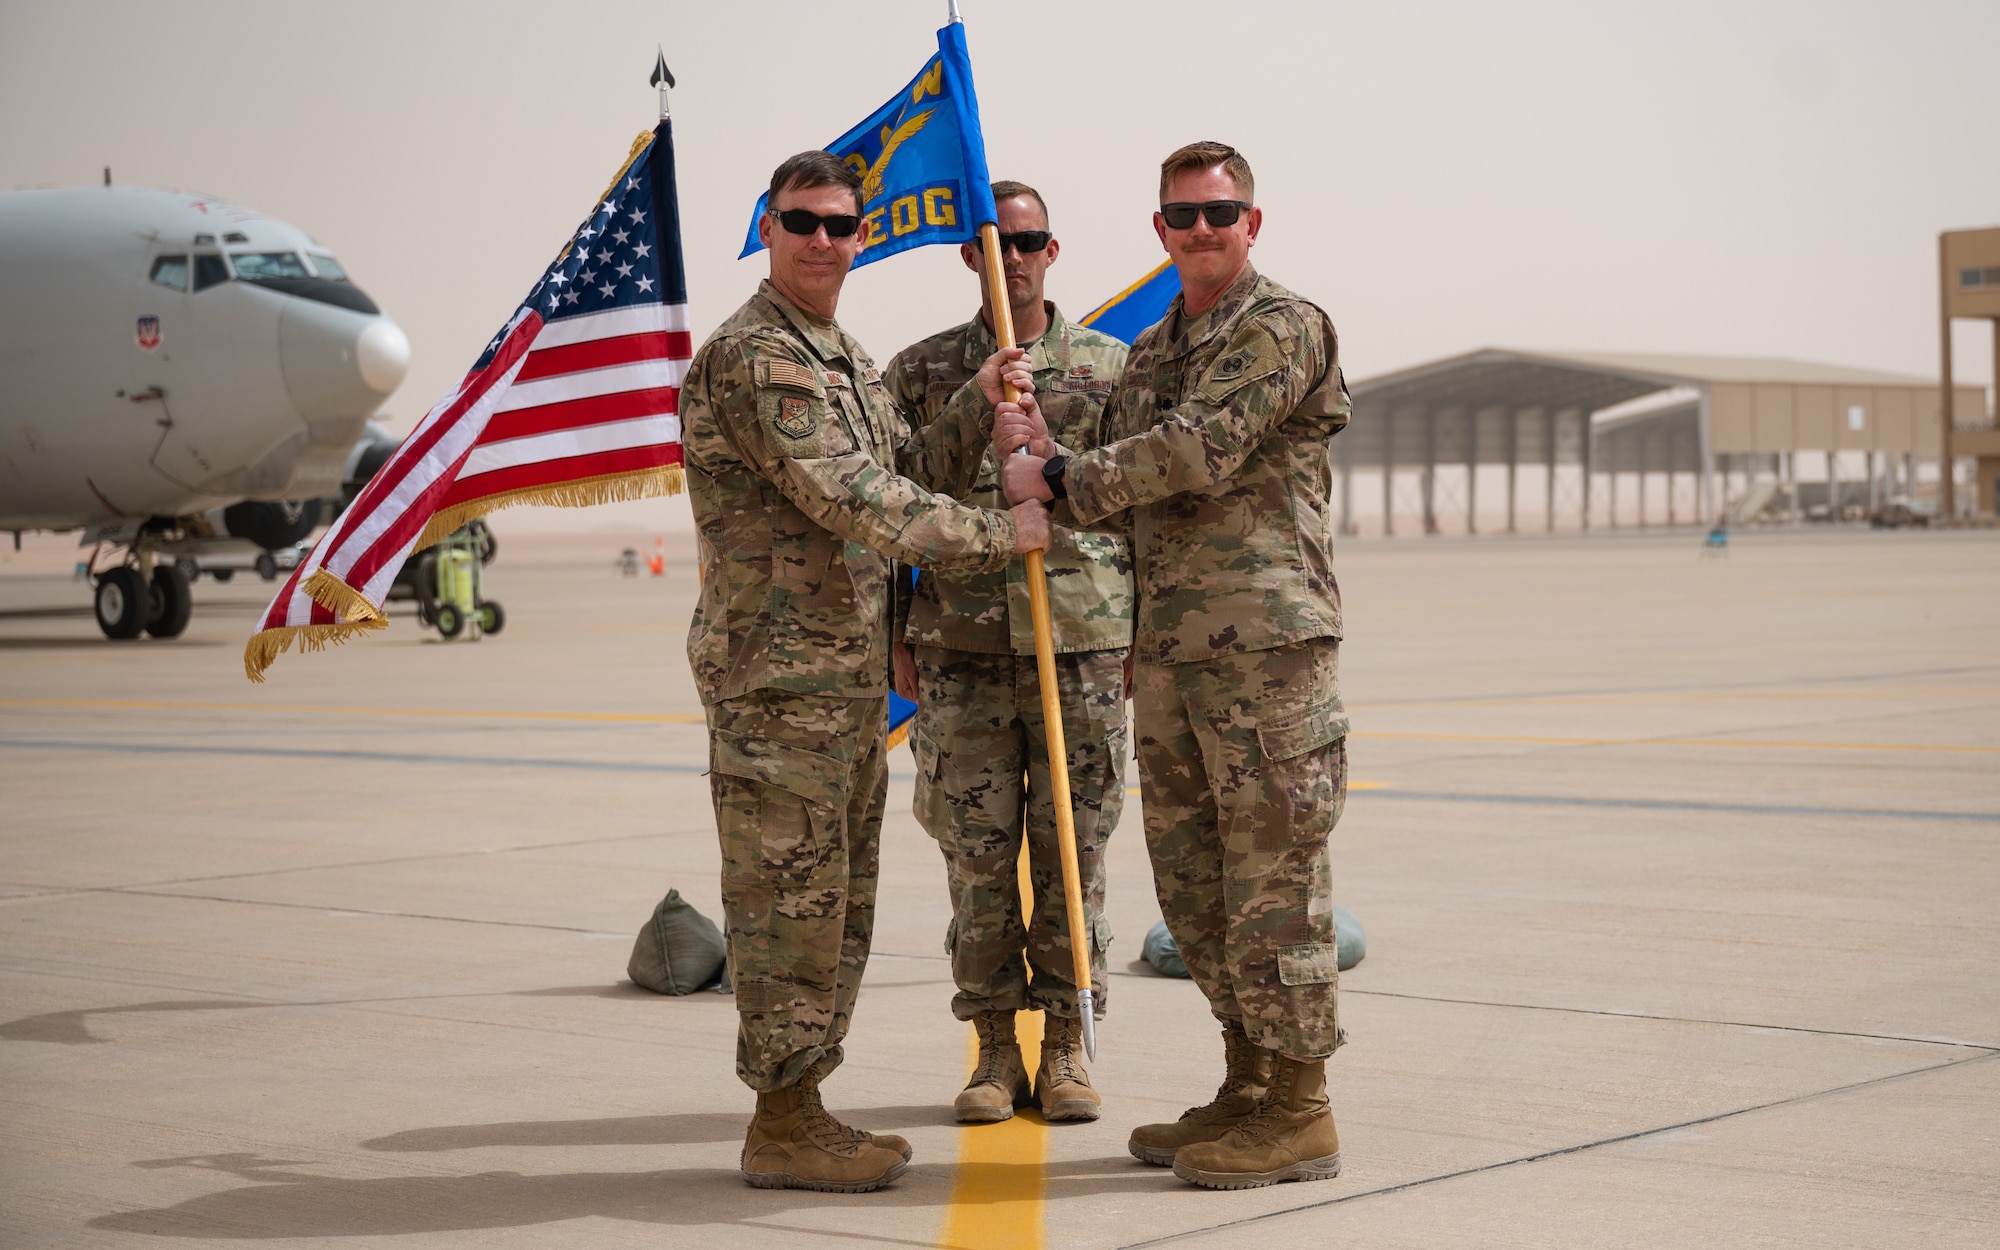 U.S. Air Force Lt. Col. Jason Purcell, right, incoming 378th Expeditionary Aircraft Maintenance Squadron commander, receives the guidon from U.S. Air Force Col. Benjamin Busch, left, 378th Expeditionary Operations Group commander, during the 378th EAMXS unit activation ceremony at Prince Sultan Air Base, Kingdom of Saudi Arabia. The passing of a squadron's guidon symbolizes the transfer of command. (U.S. Air Force photo by Senior Airman Jacob B. Wrightsman)